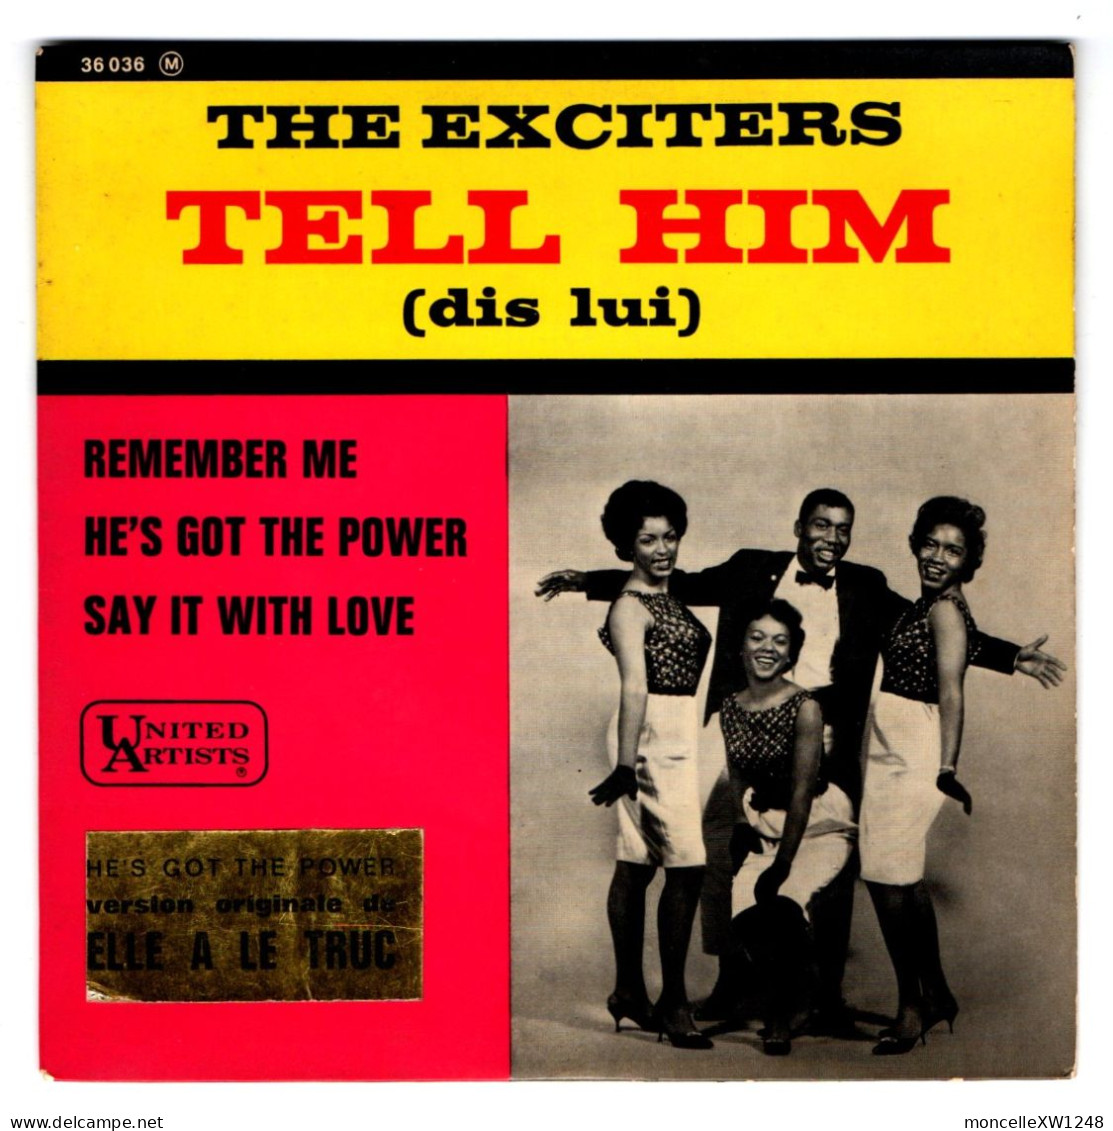 The Exciters - 45 T EP Tell Him (1963) - 45 Rpm - Maxi-Singles